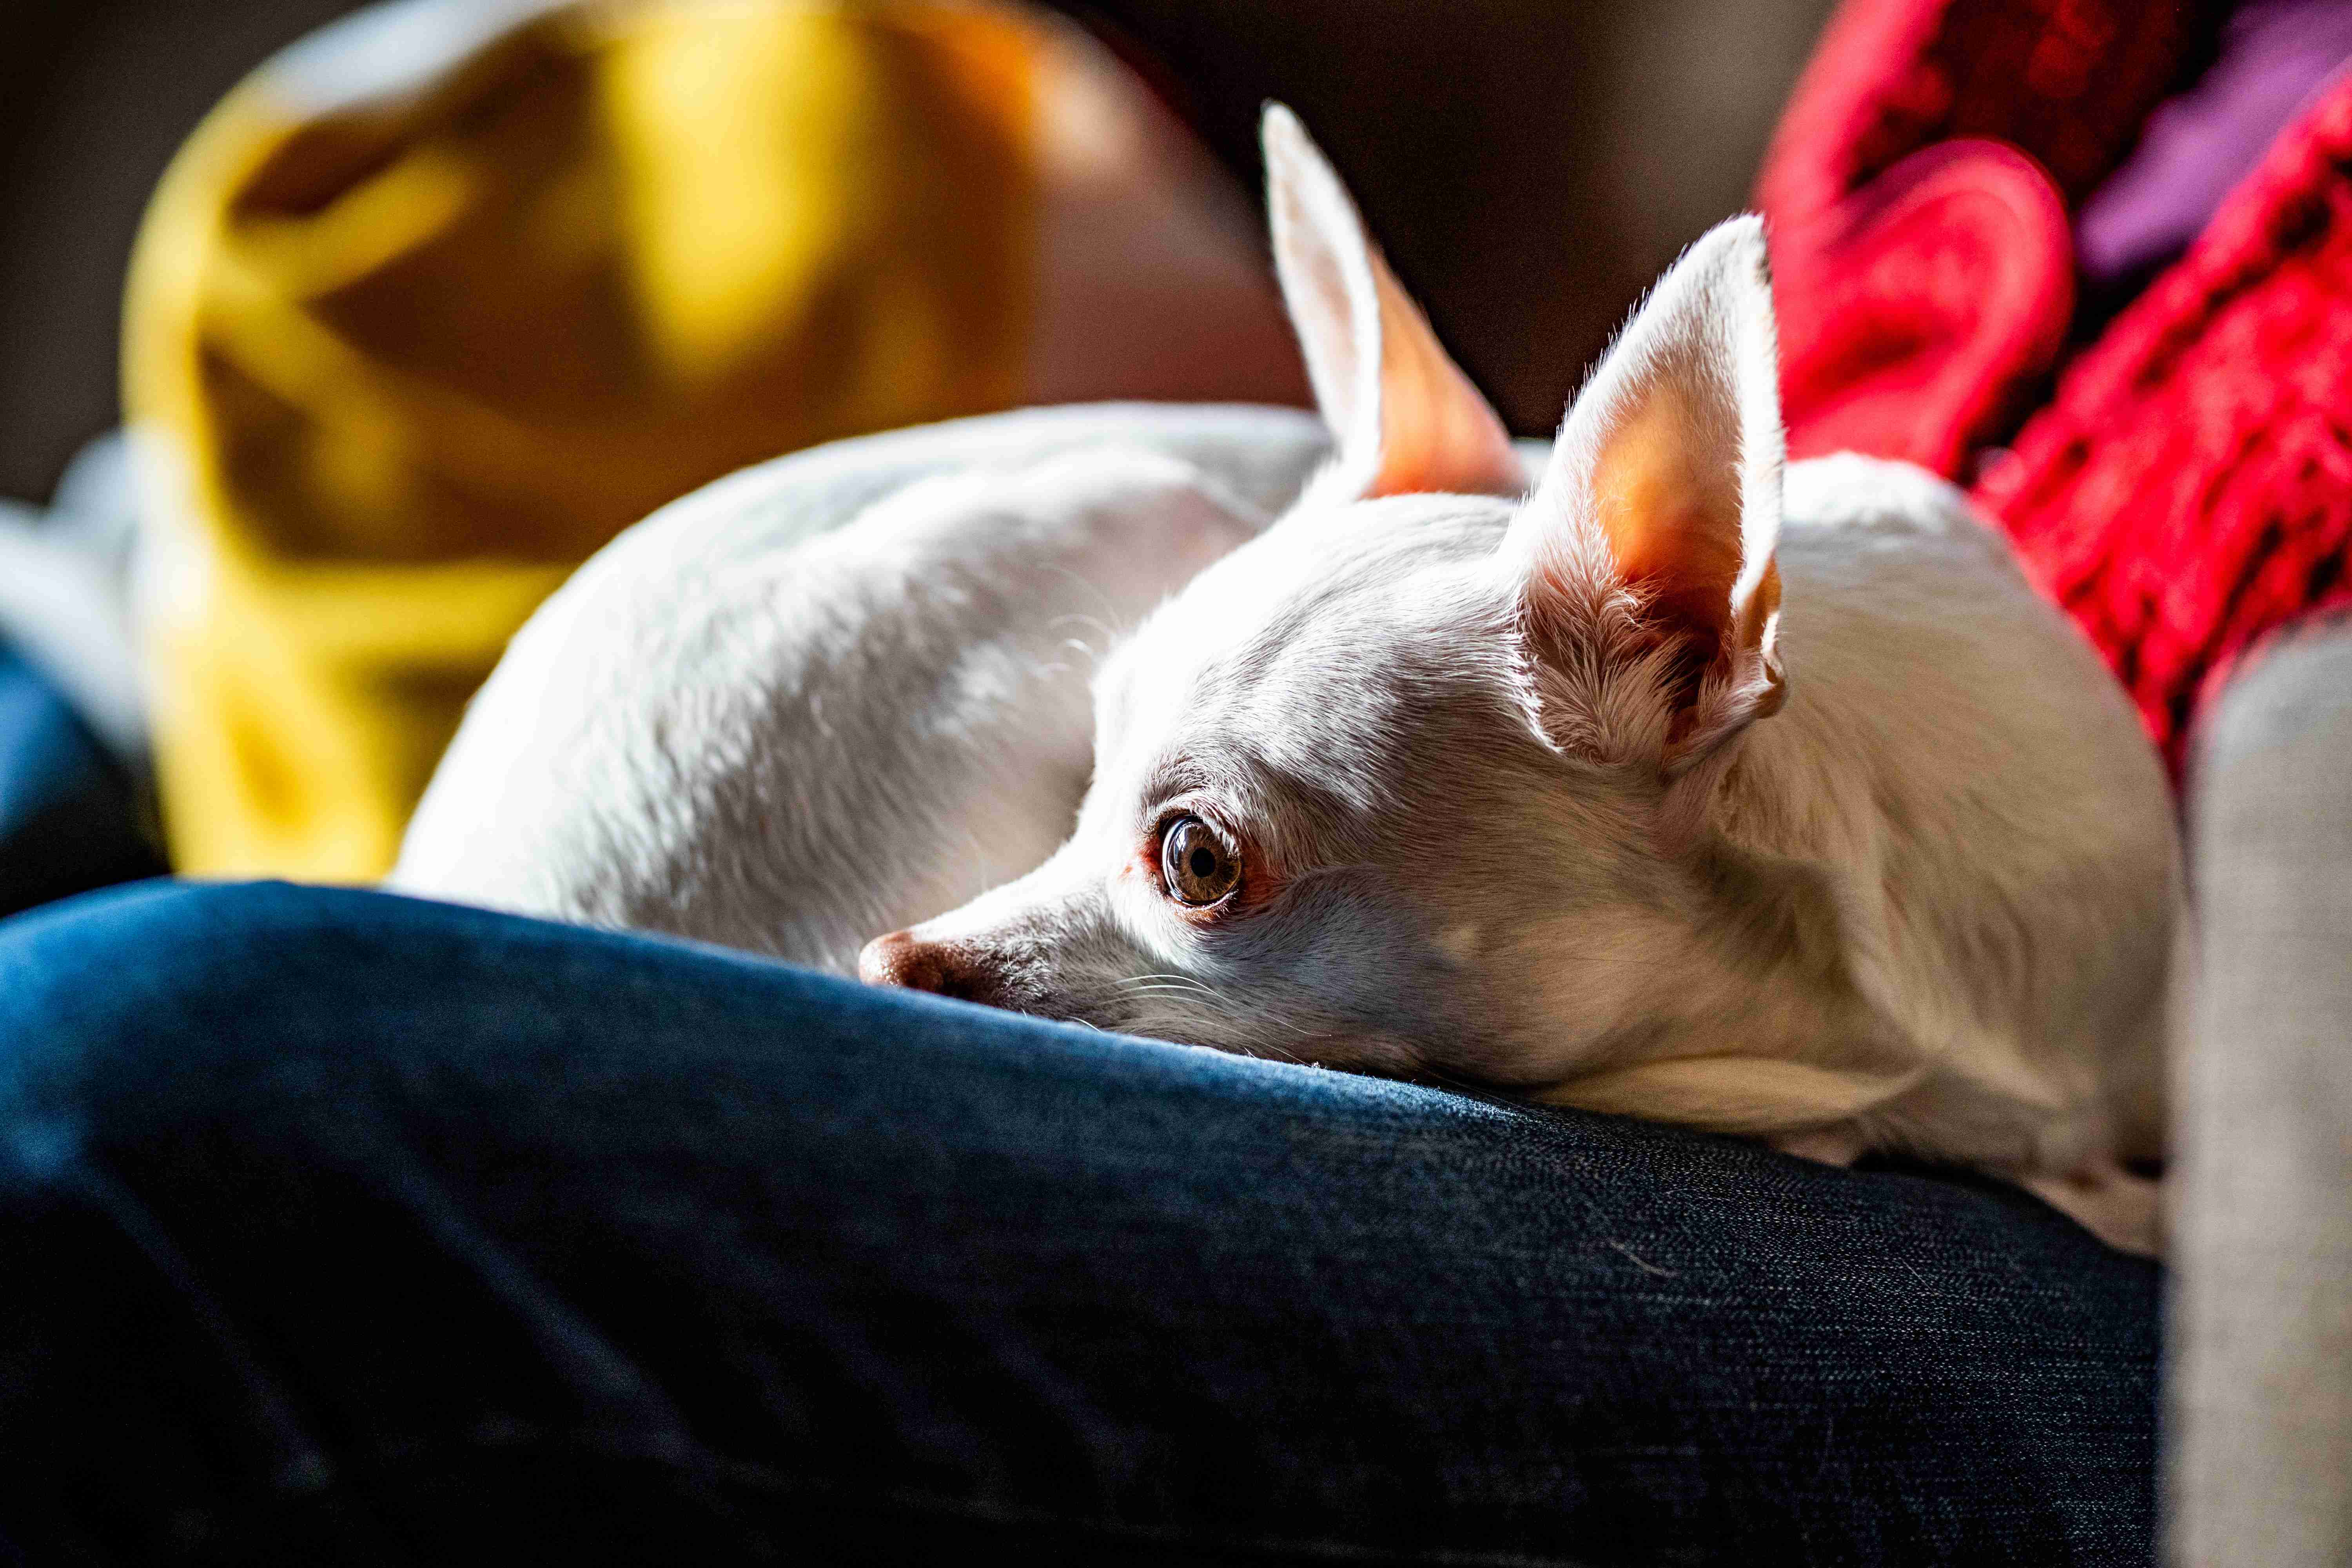 Are there any specific relaxation aids or products that can help calm a Chihuahua's anger?